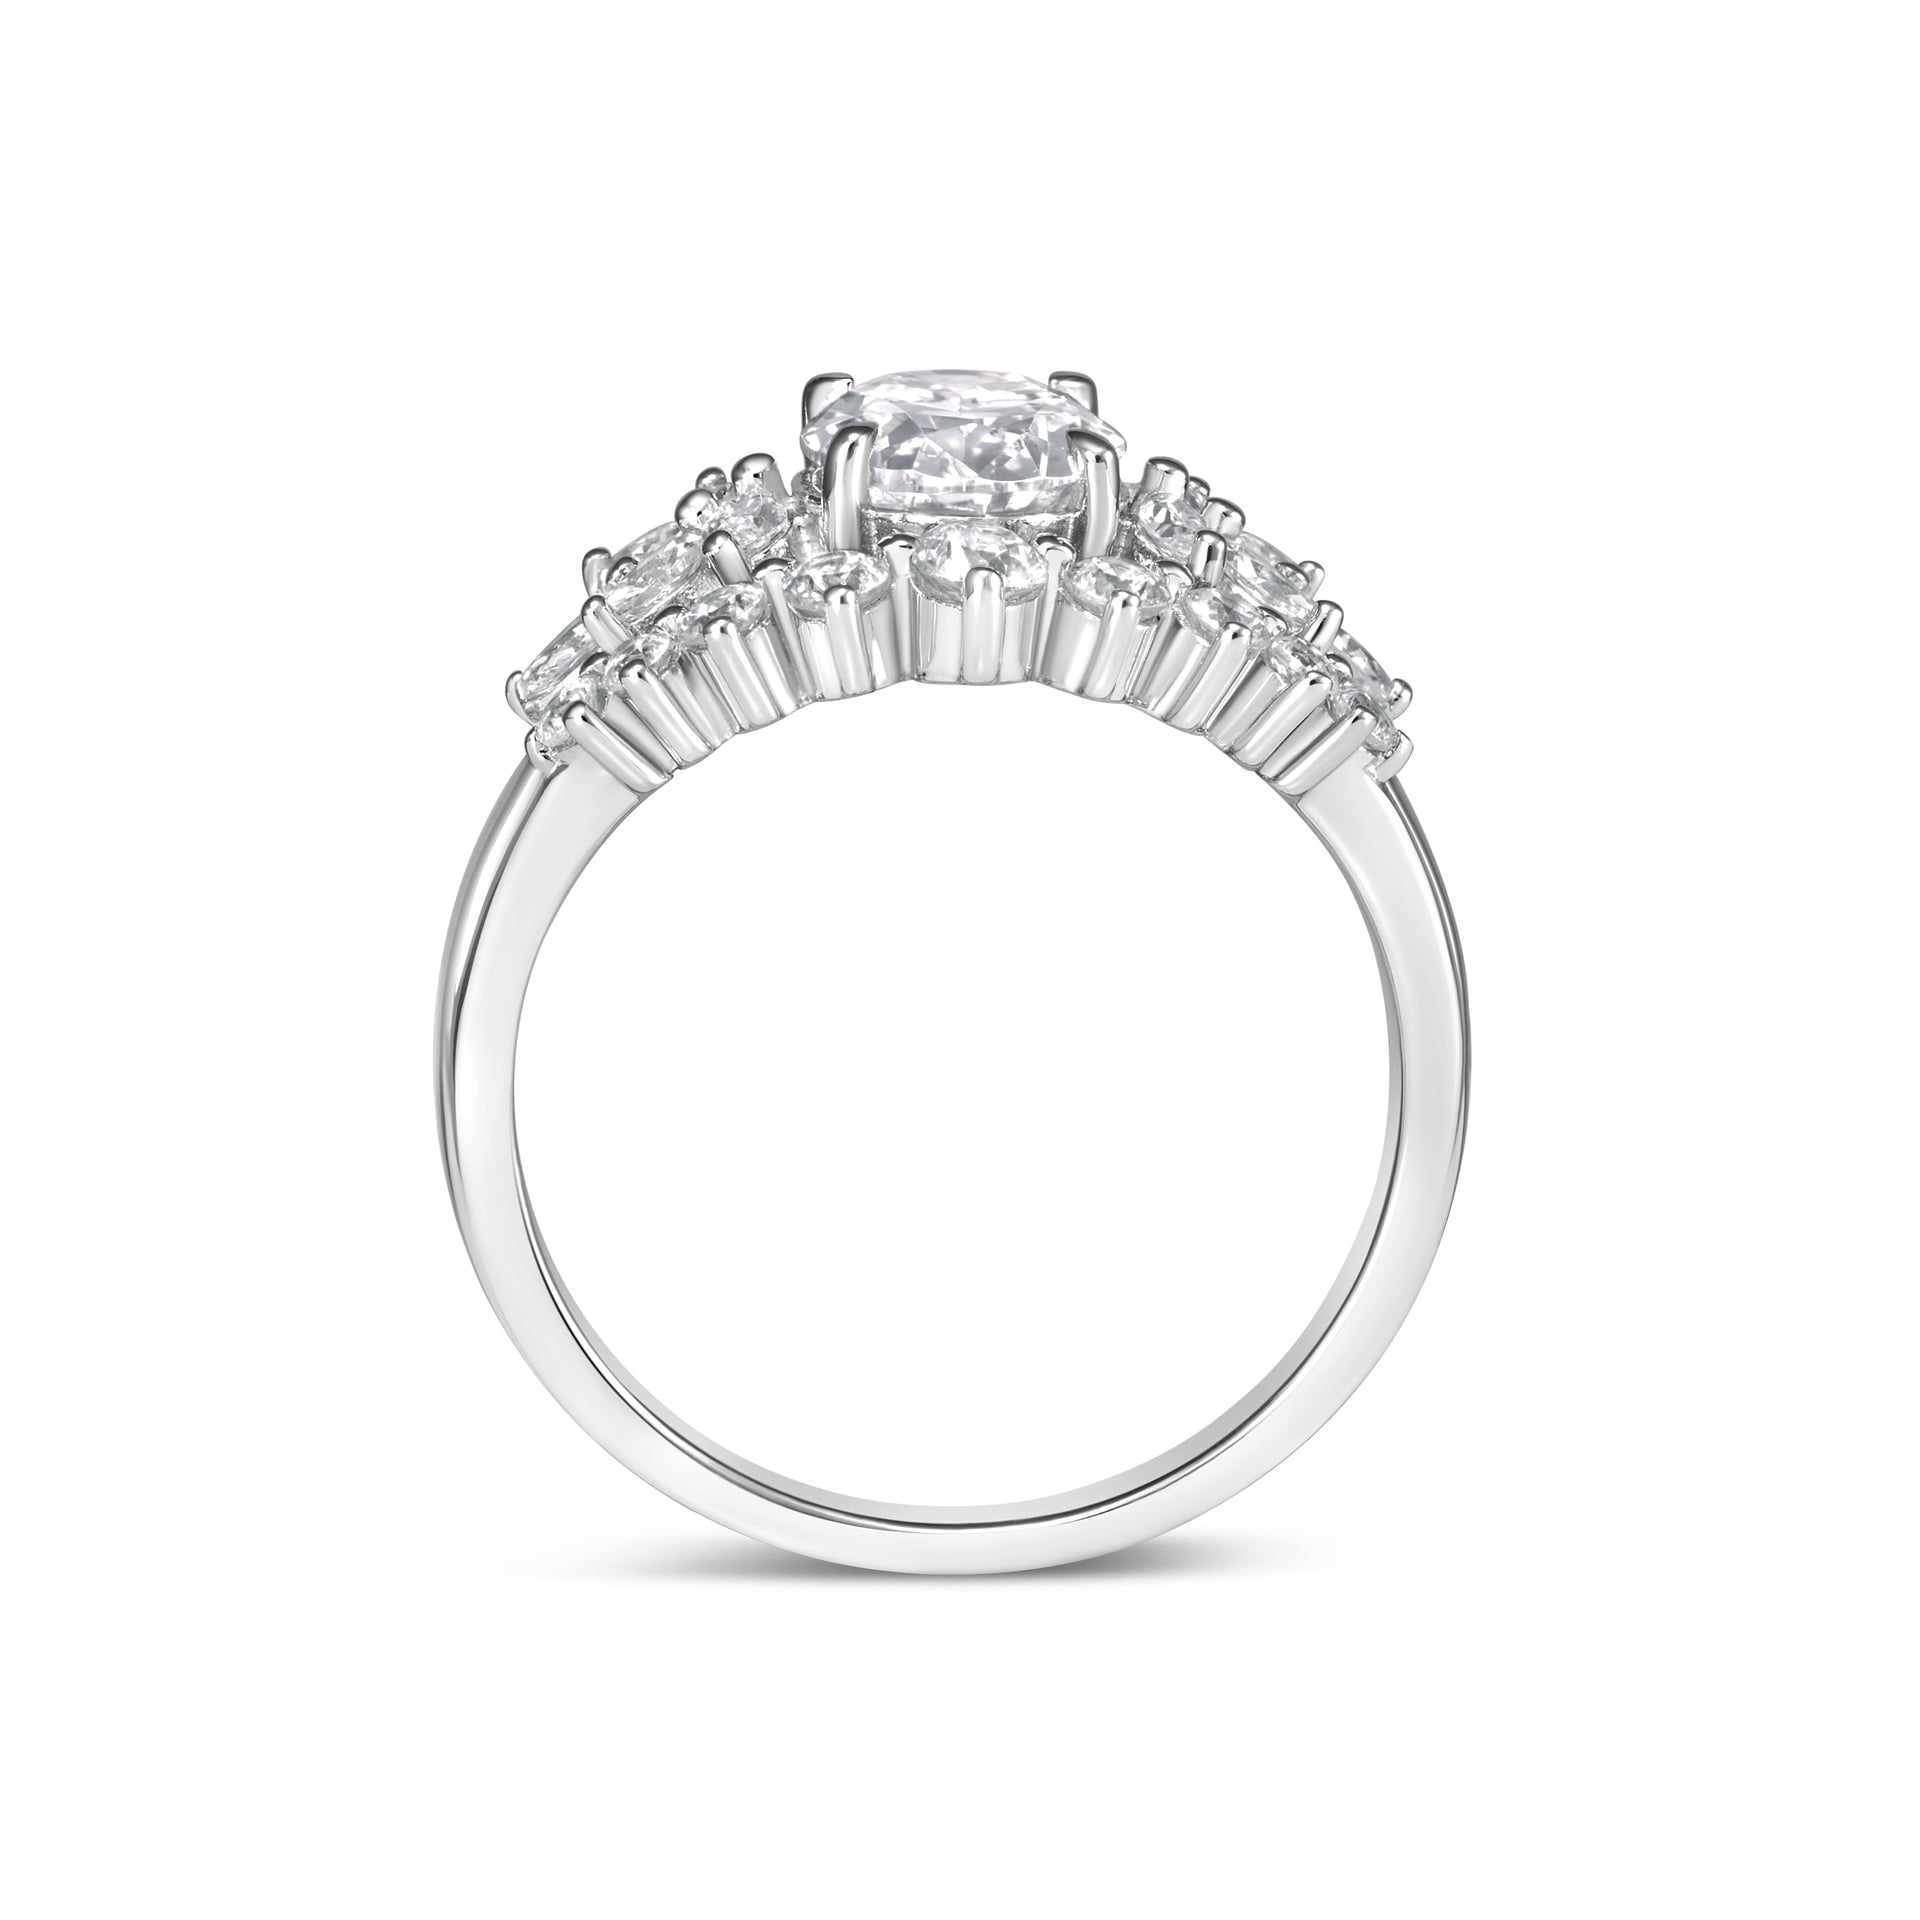 Vintage side profile engagement ring with oval cut center stone and marquise and round side stones.